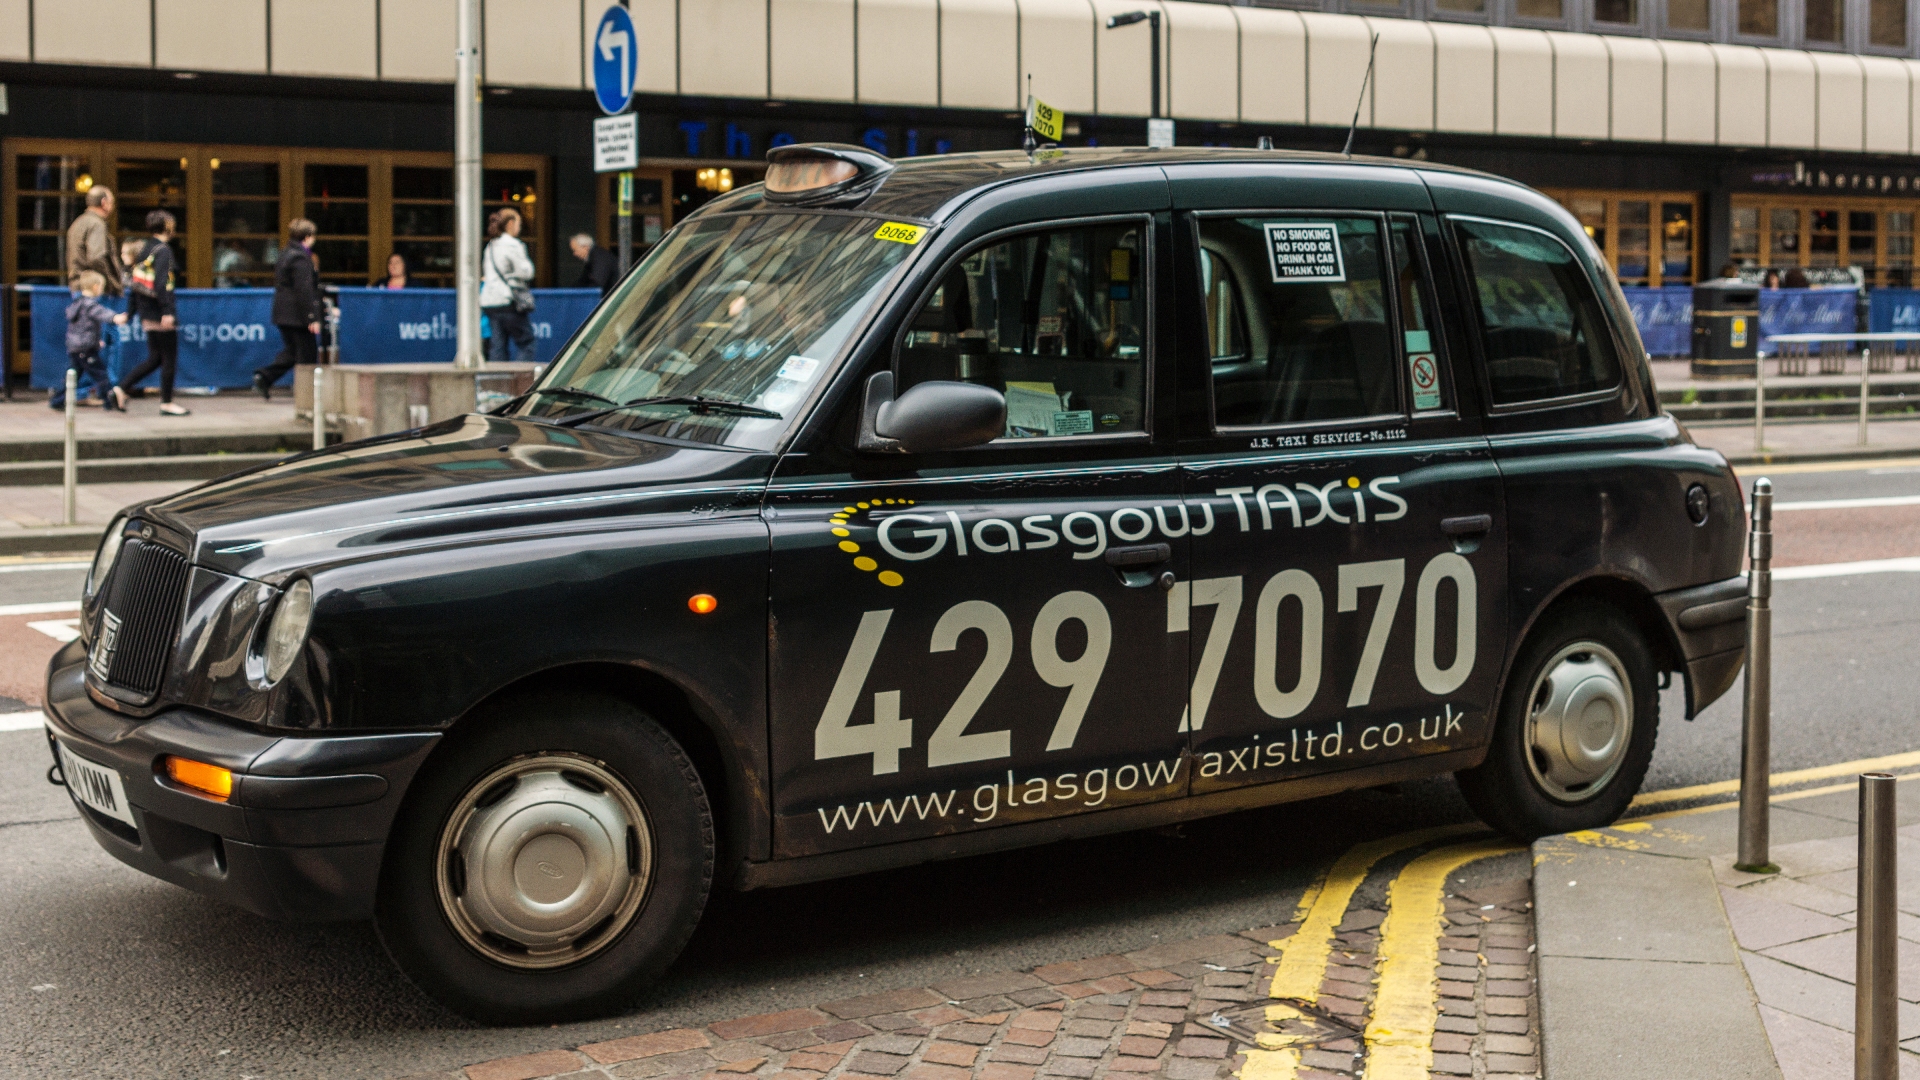 While the number of cab licenses granted has not seen such an extreme drop, with 19 issued in 2019 and 13 in 2022, renewal levels have dropped dramatically.